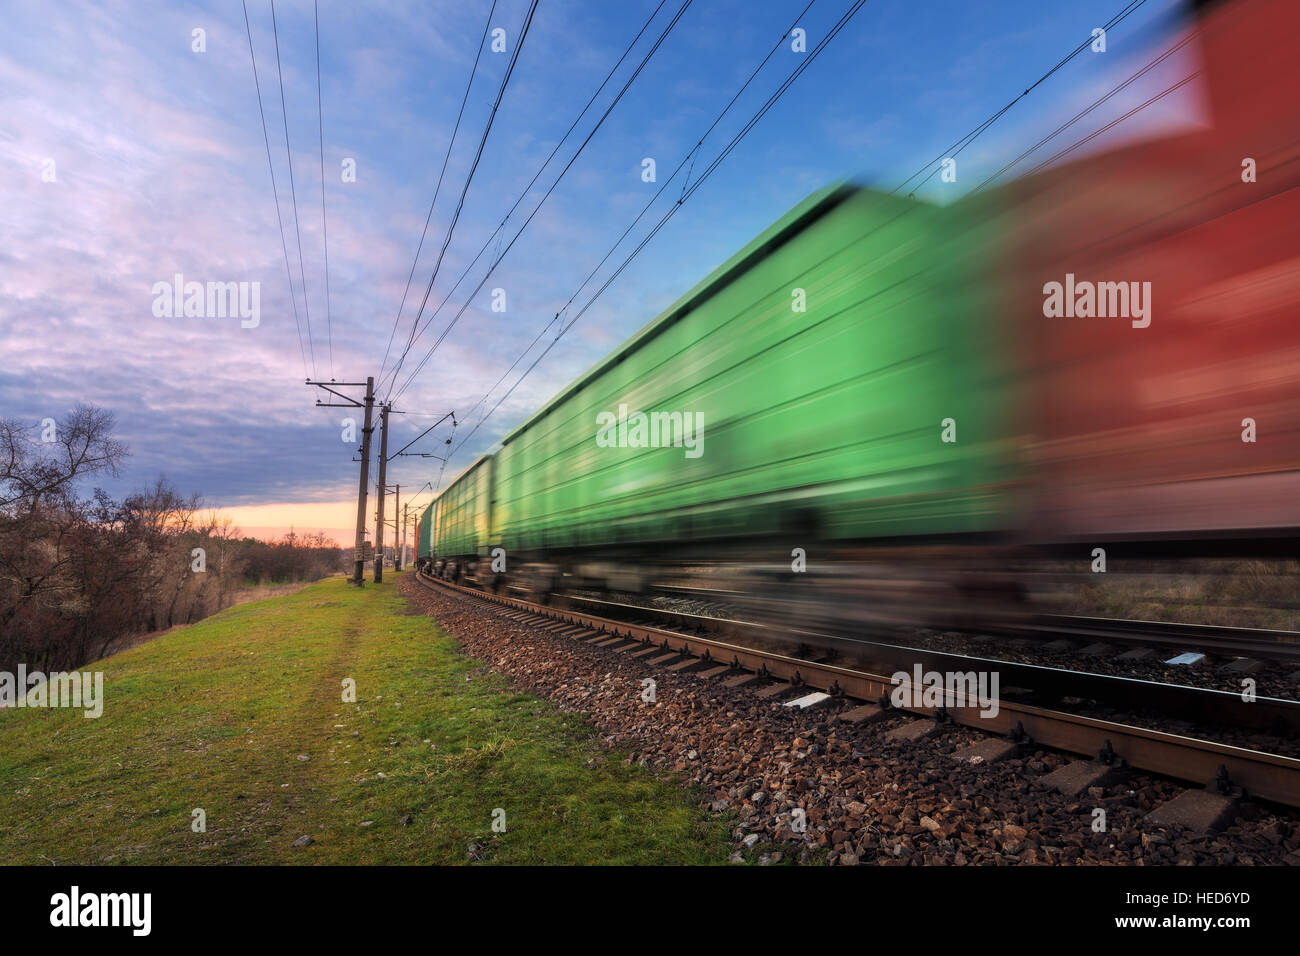 Railway station with cargo wagons and train in motion against blue sky at sunset. Colorful industrial landscape. Railroad Stock Photo